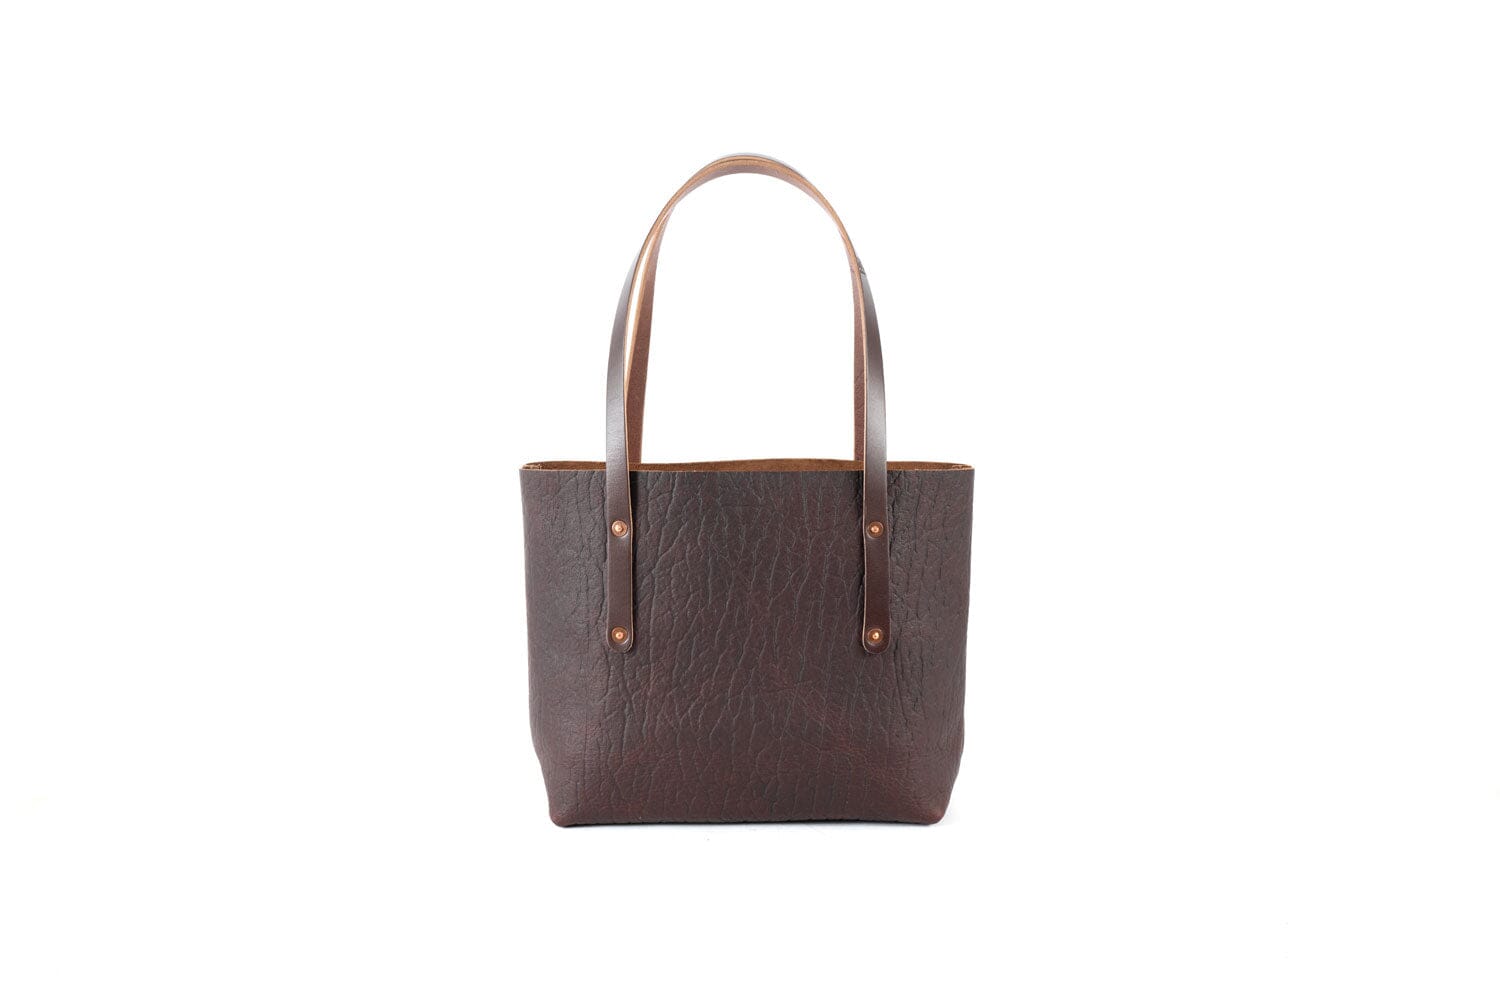 AVERY LEATHER TOTE BAG - SMALL - CHERRY BISON